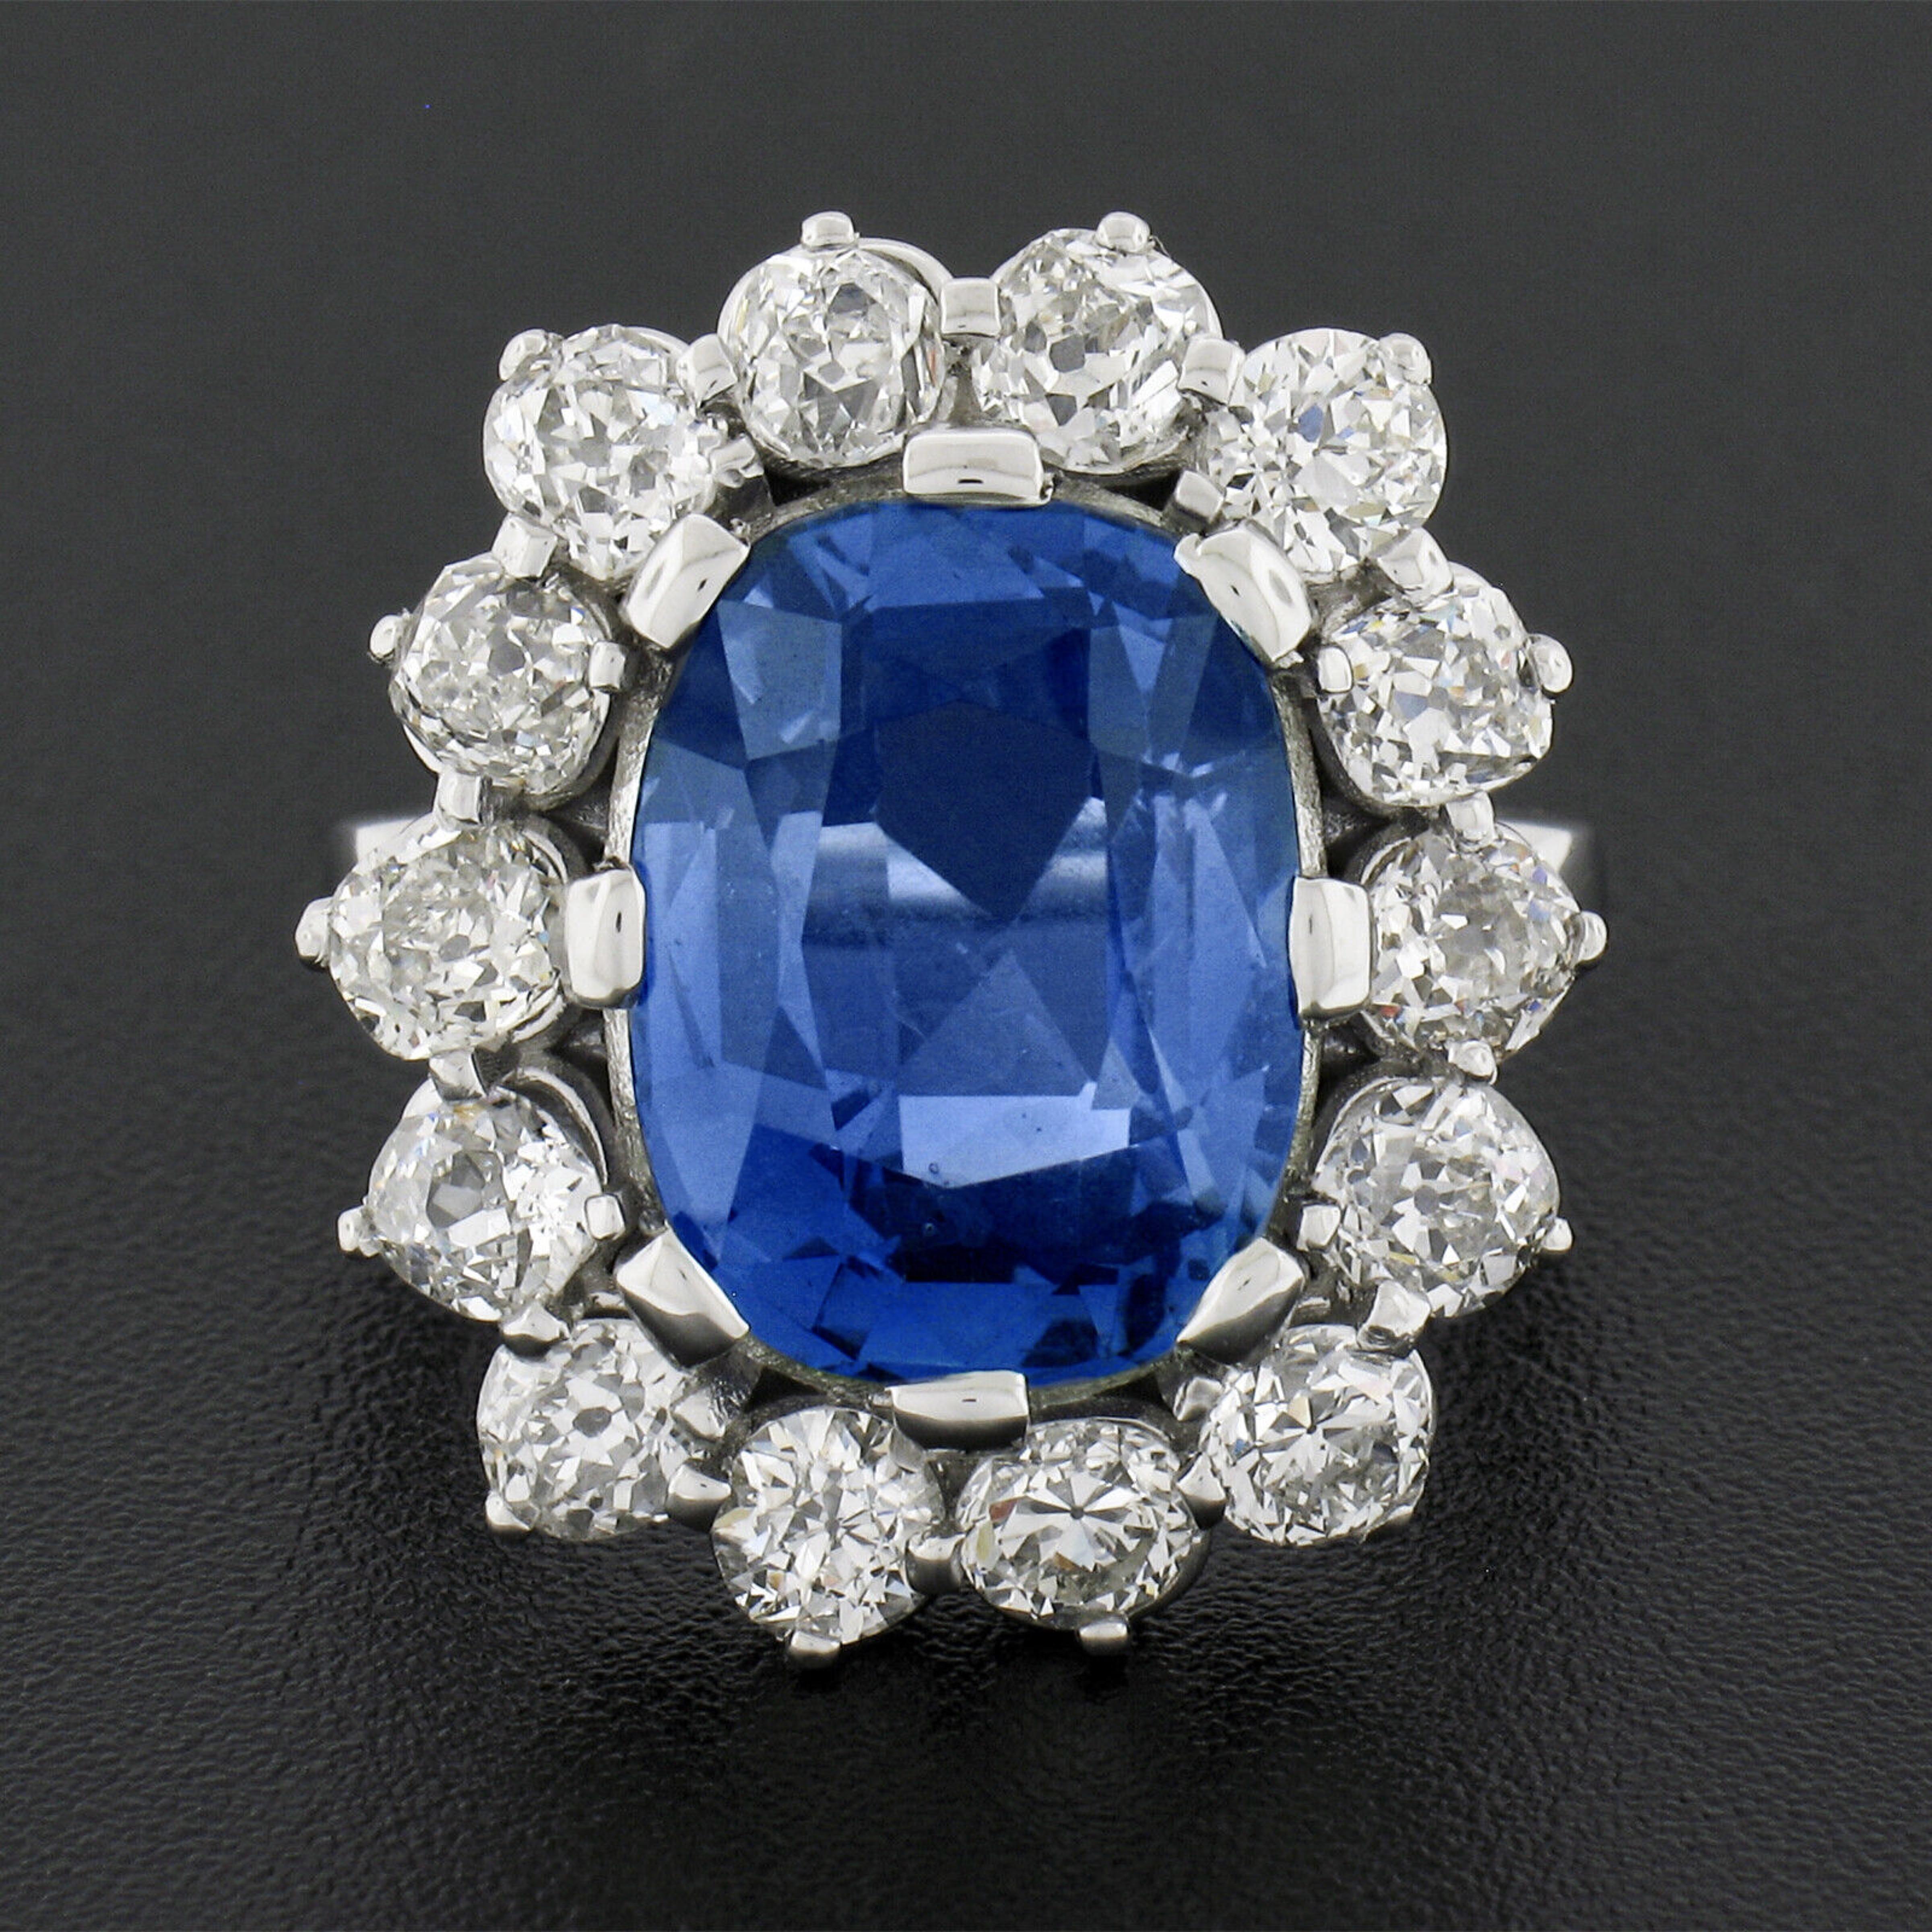 You are looking at a truly breathtaking, custom designed, sapphire and diamond platter ring that is newly crafted in solid platinum. This brand new ring is set with antique stones featuring a large, AGL certified, Ceylon sapphire stone that is